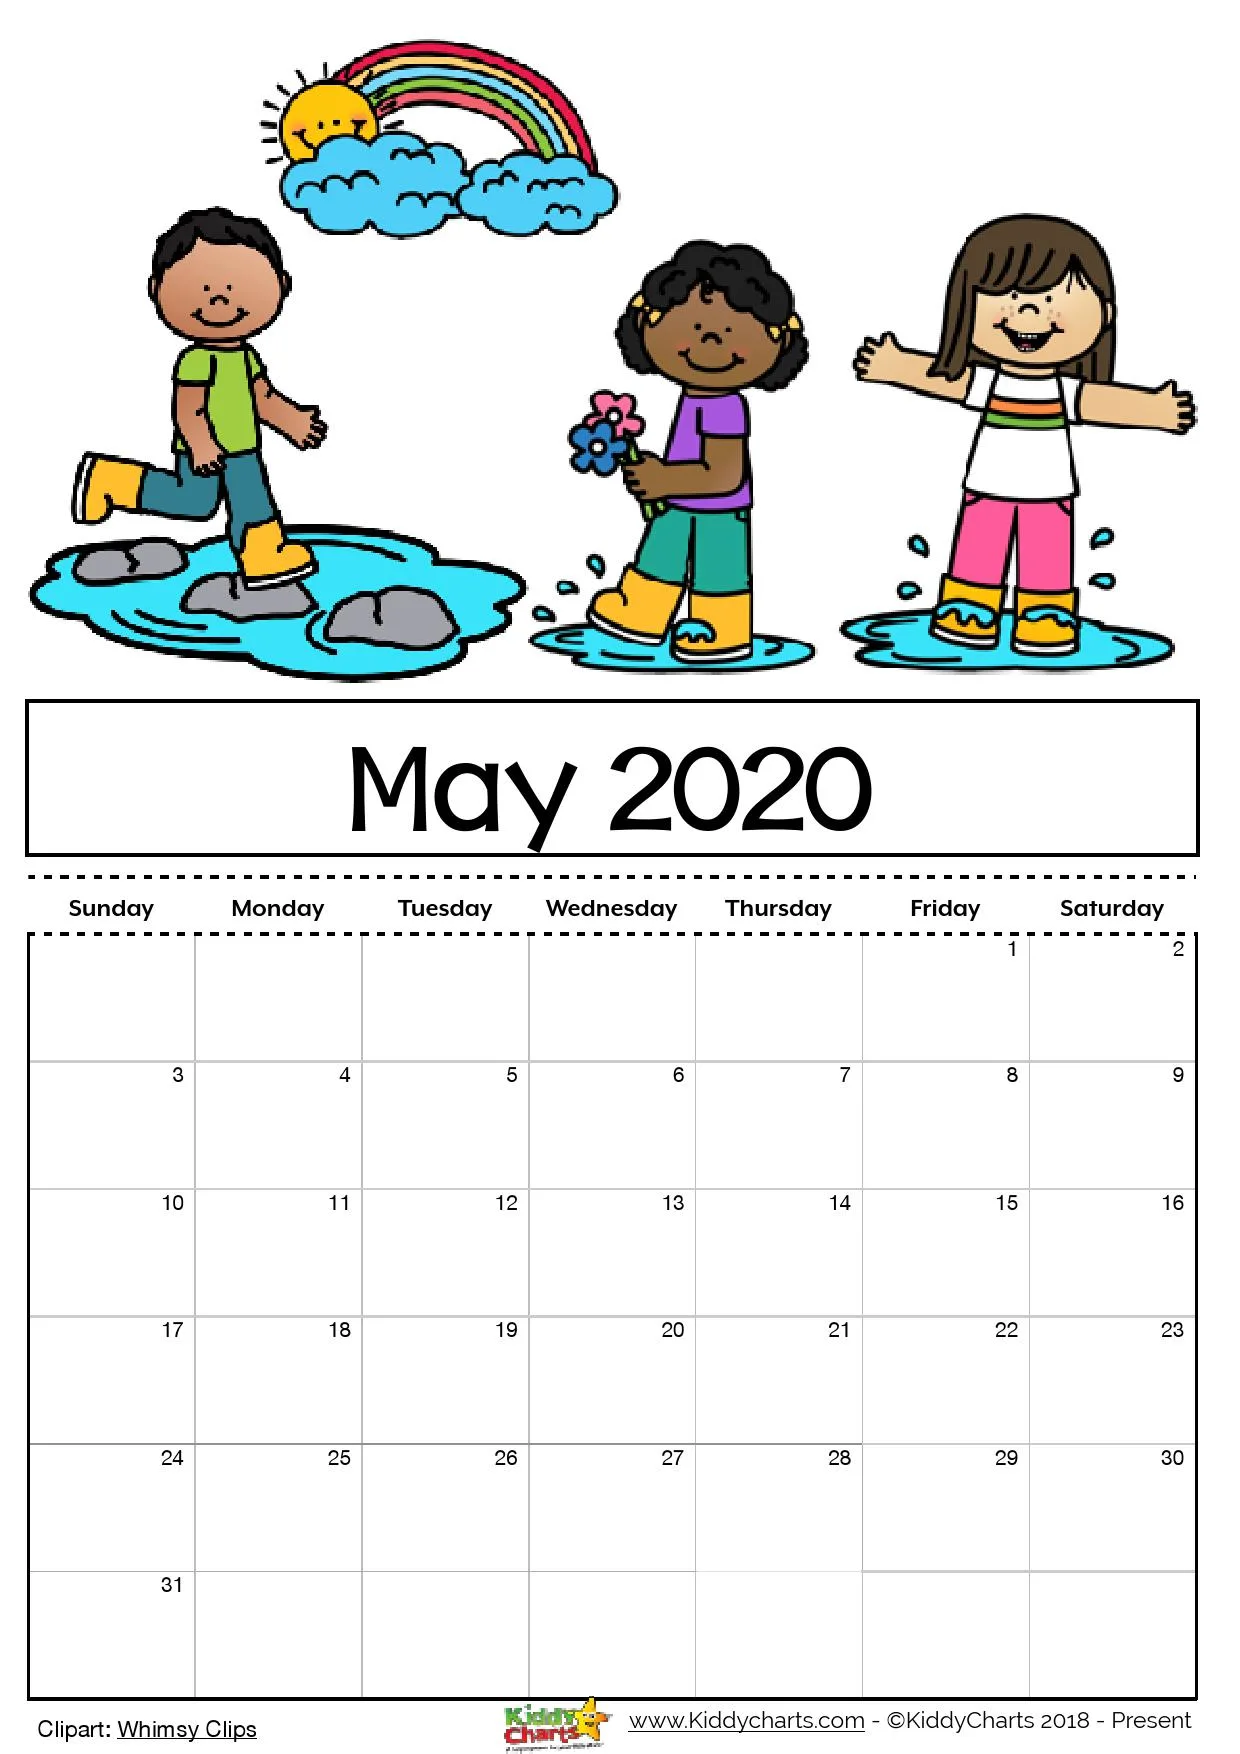 Looking for a free printable 2020 calendar? Then we've got it for you - come take a look now! #calendar2020 #printables #kidsprintables #calendars #kids